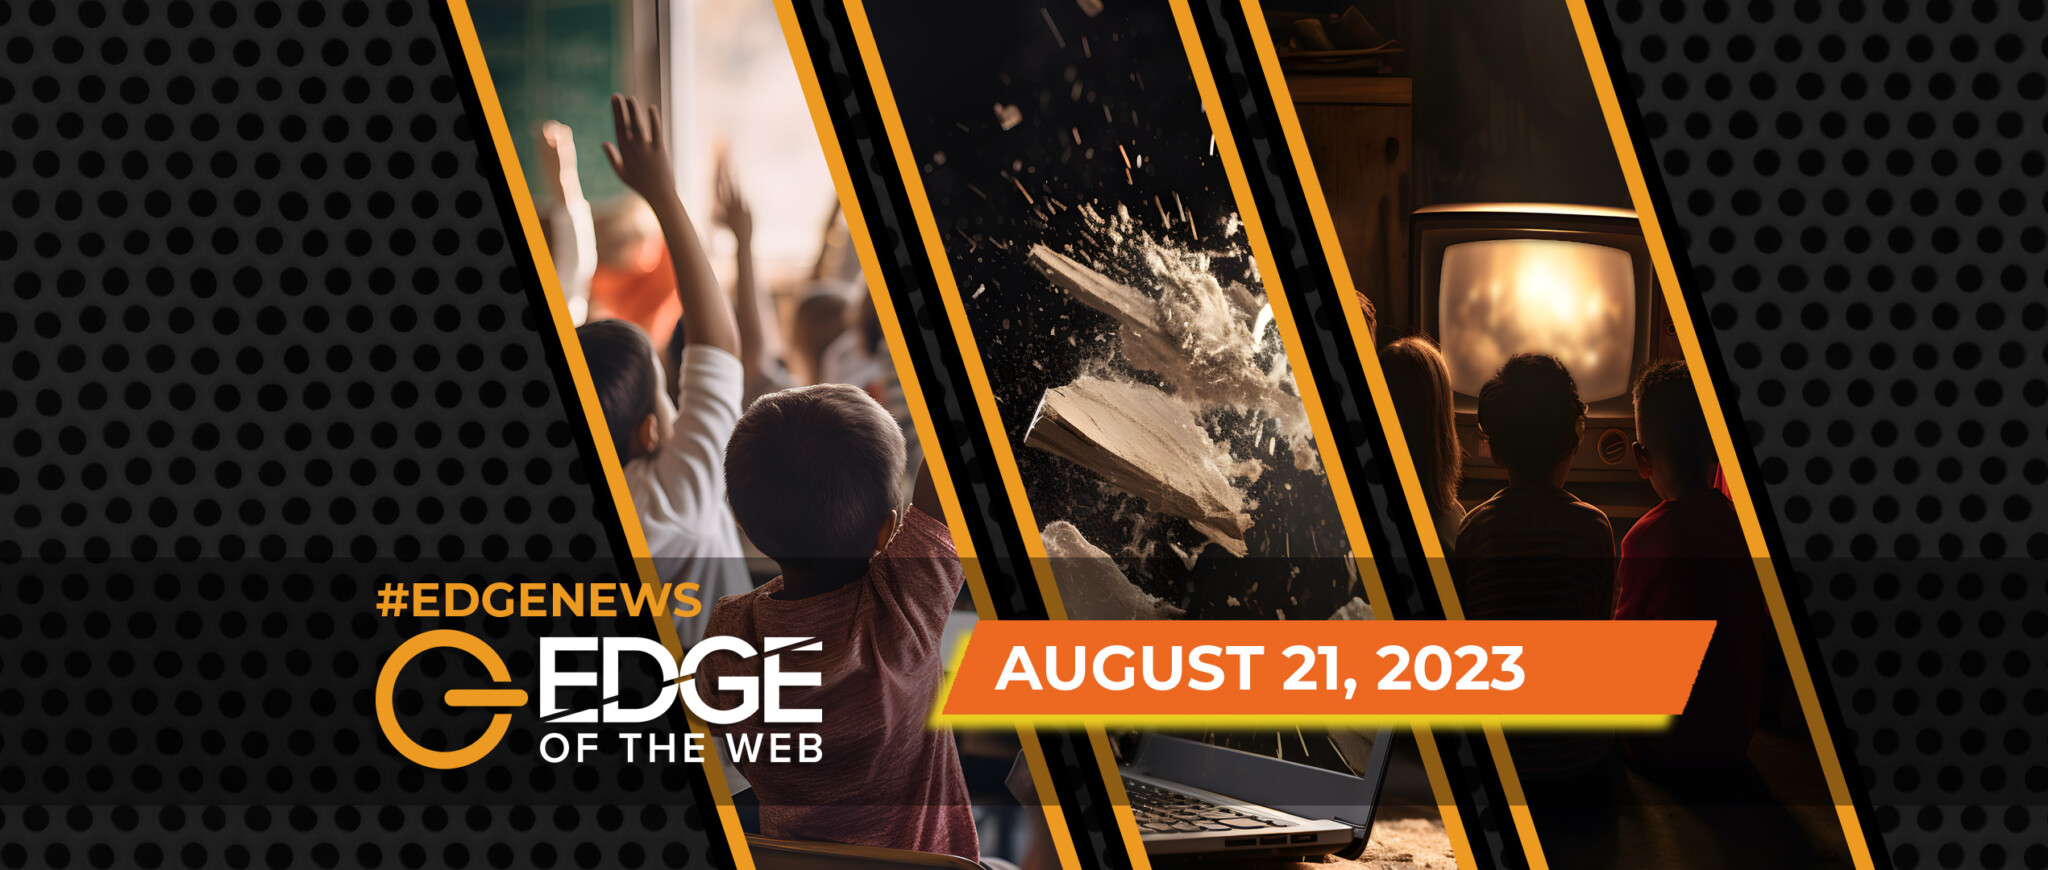 619 | News from the EDGE | Week of 8.21.2023